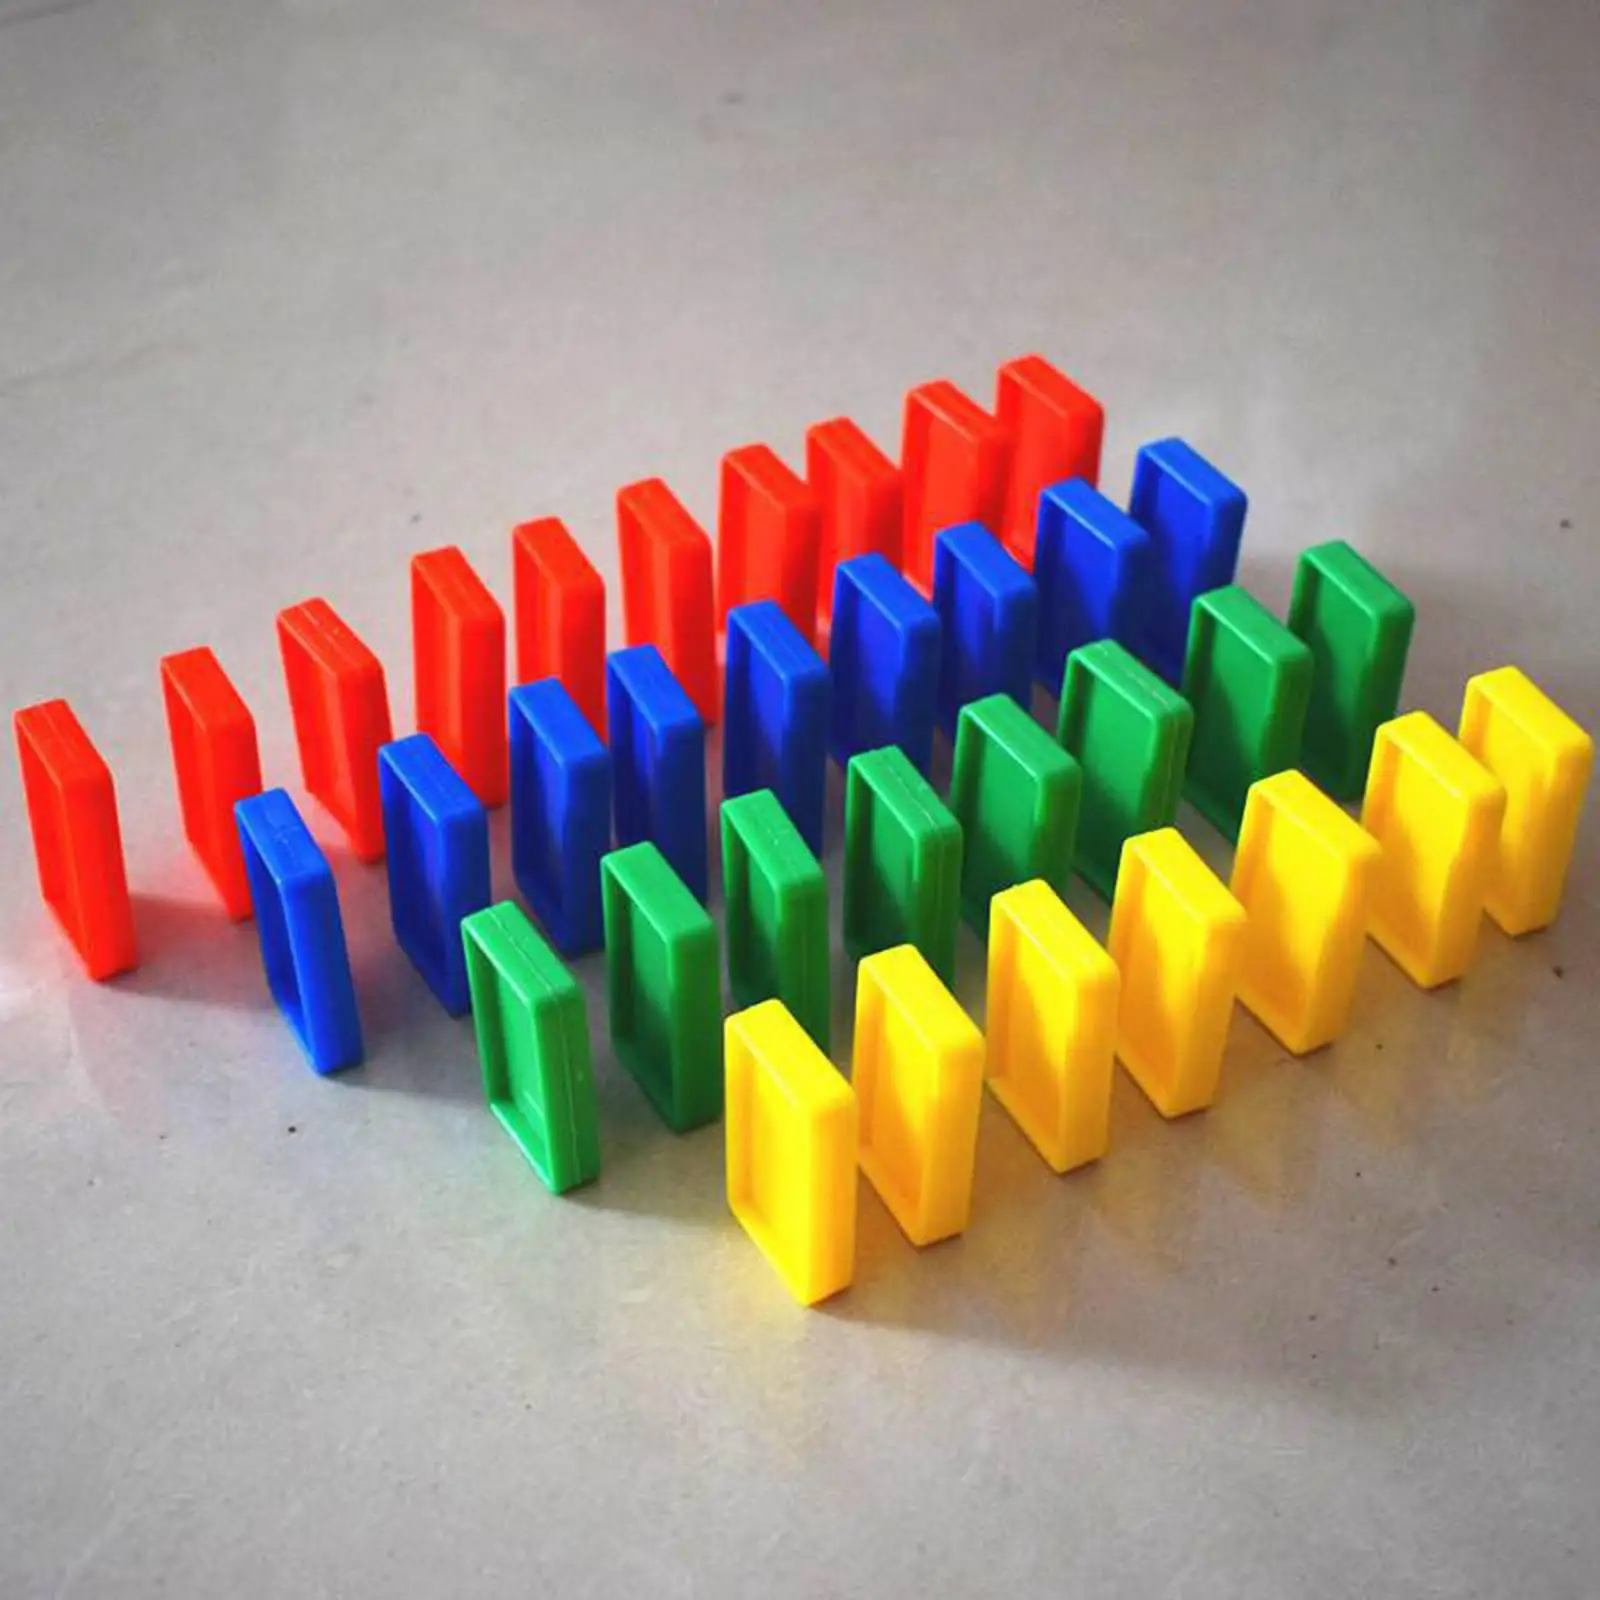 100Pcs Colorful Dominoes Blocks Stacking Toy Educational Play Game Family Games for Toddler Children Birthday Gifts